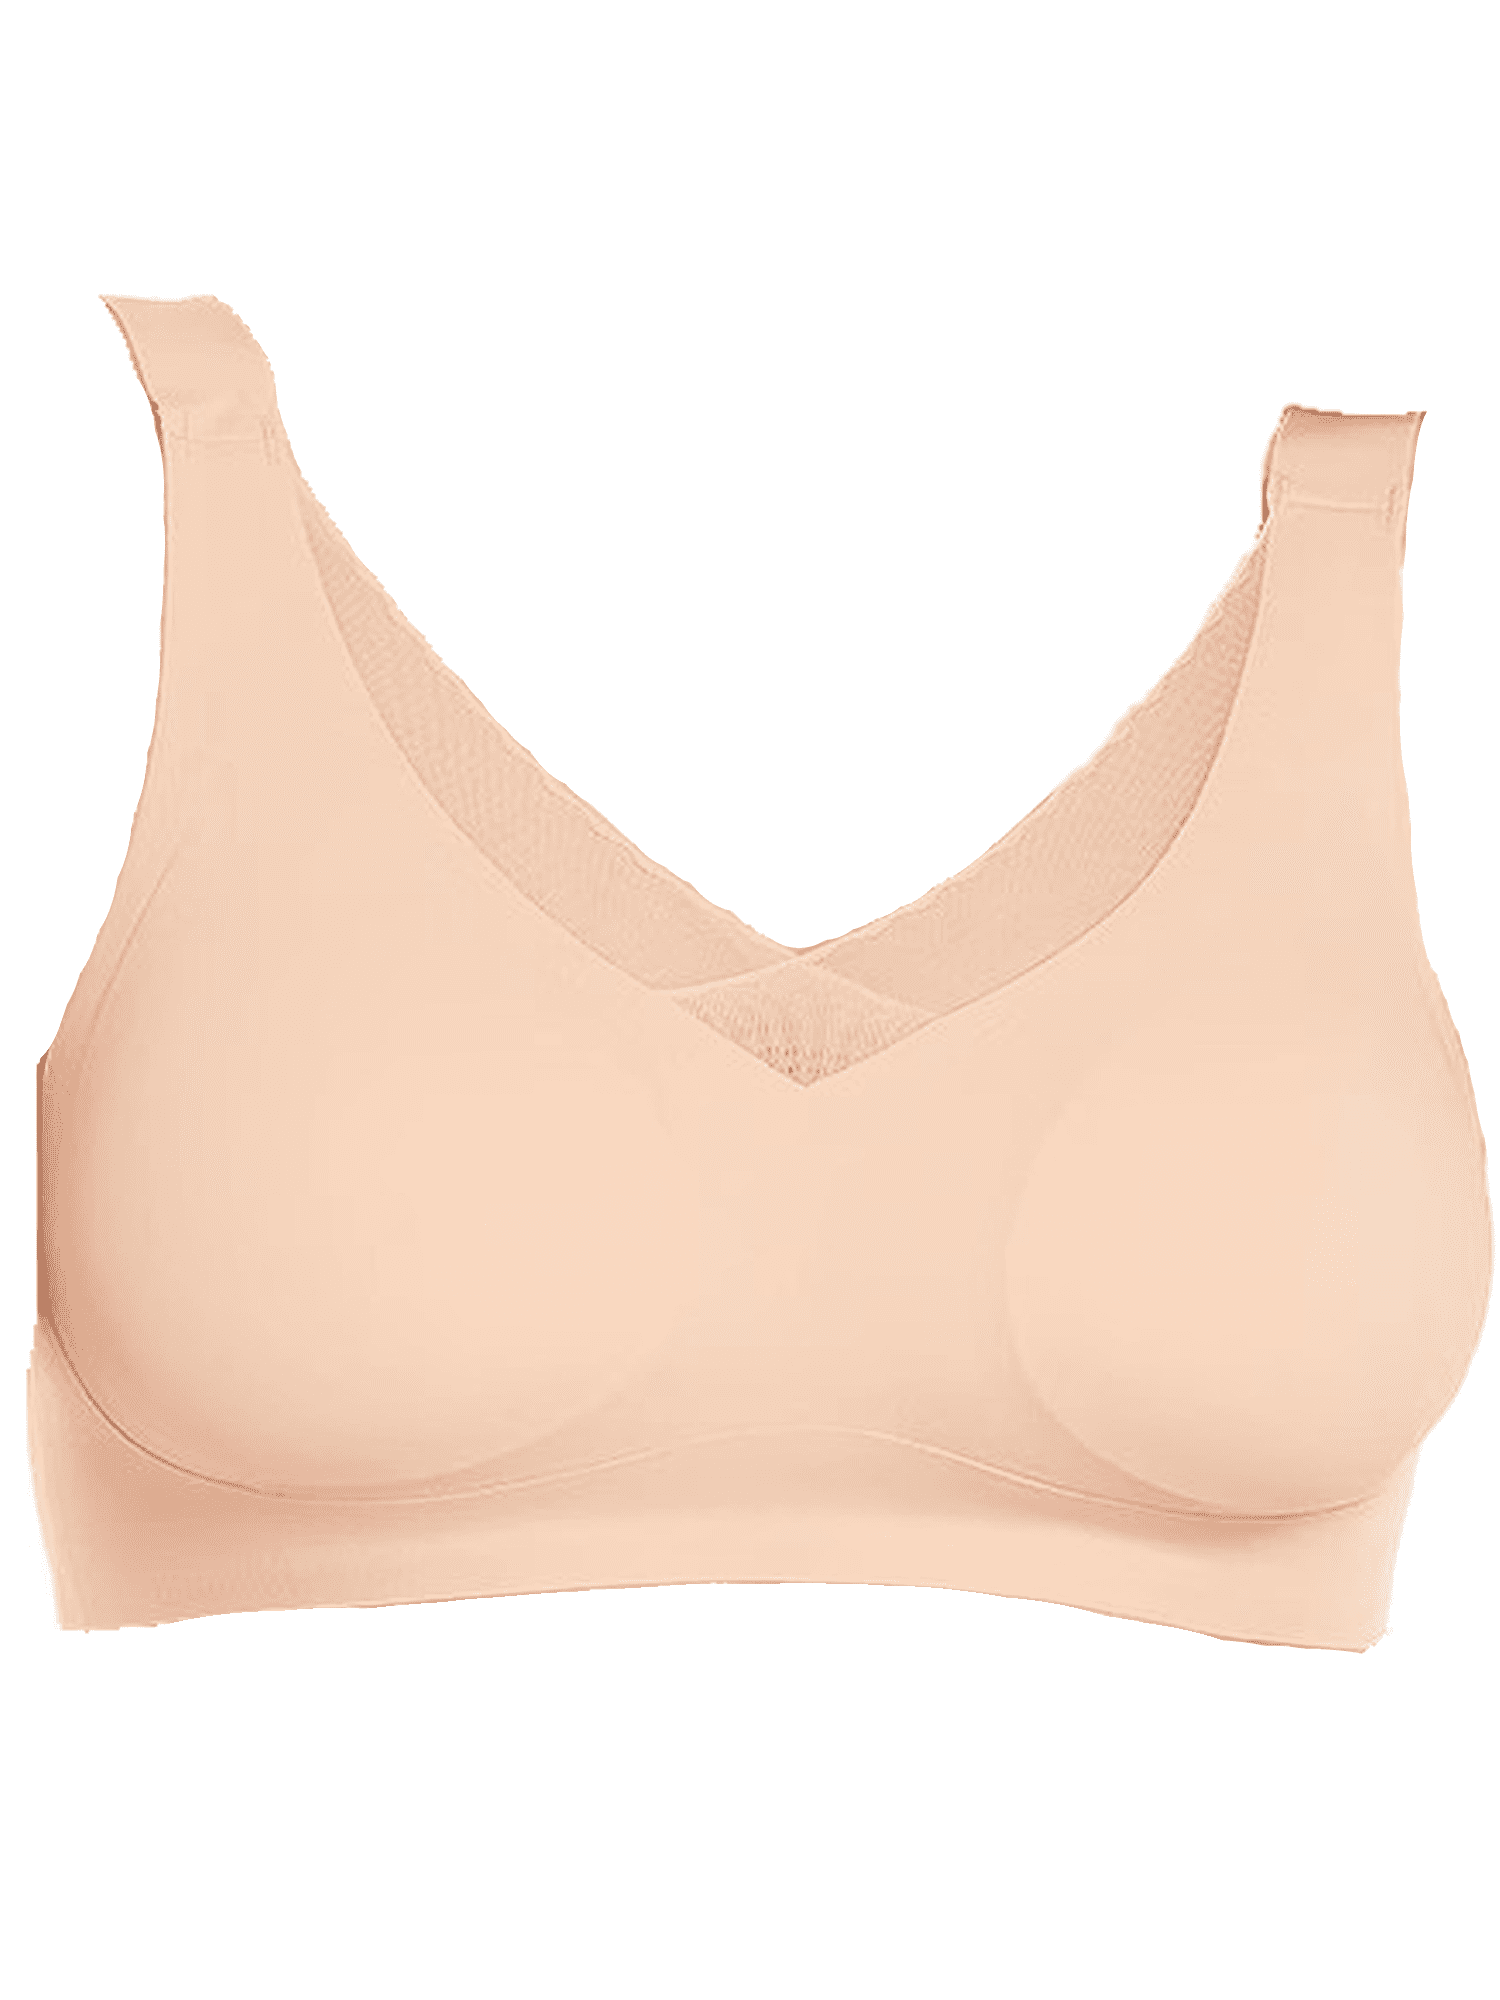 BIMEI Seamless Mastectomy Bra for Women Breast Prosthesis with Pockets  Silky Smooth Bras Soft Daily Full Coverage Bralettes Bras with Removable  Pads,Beige,2XL 